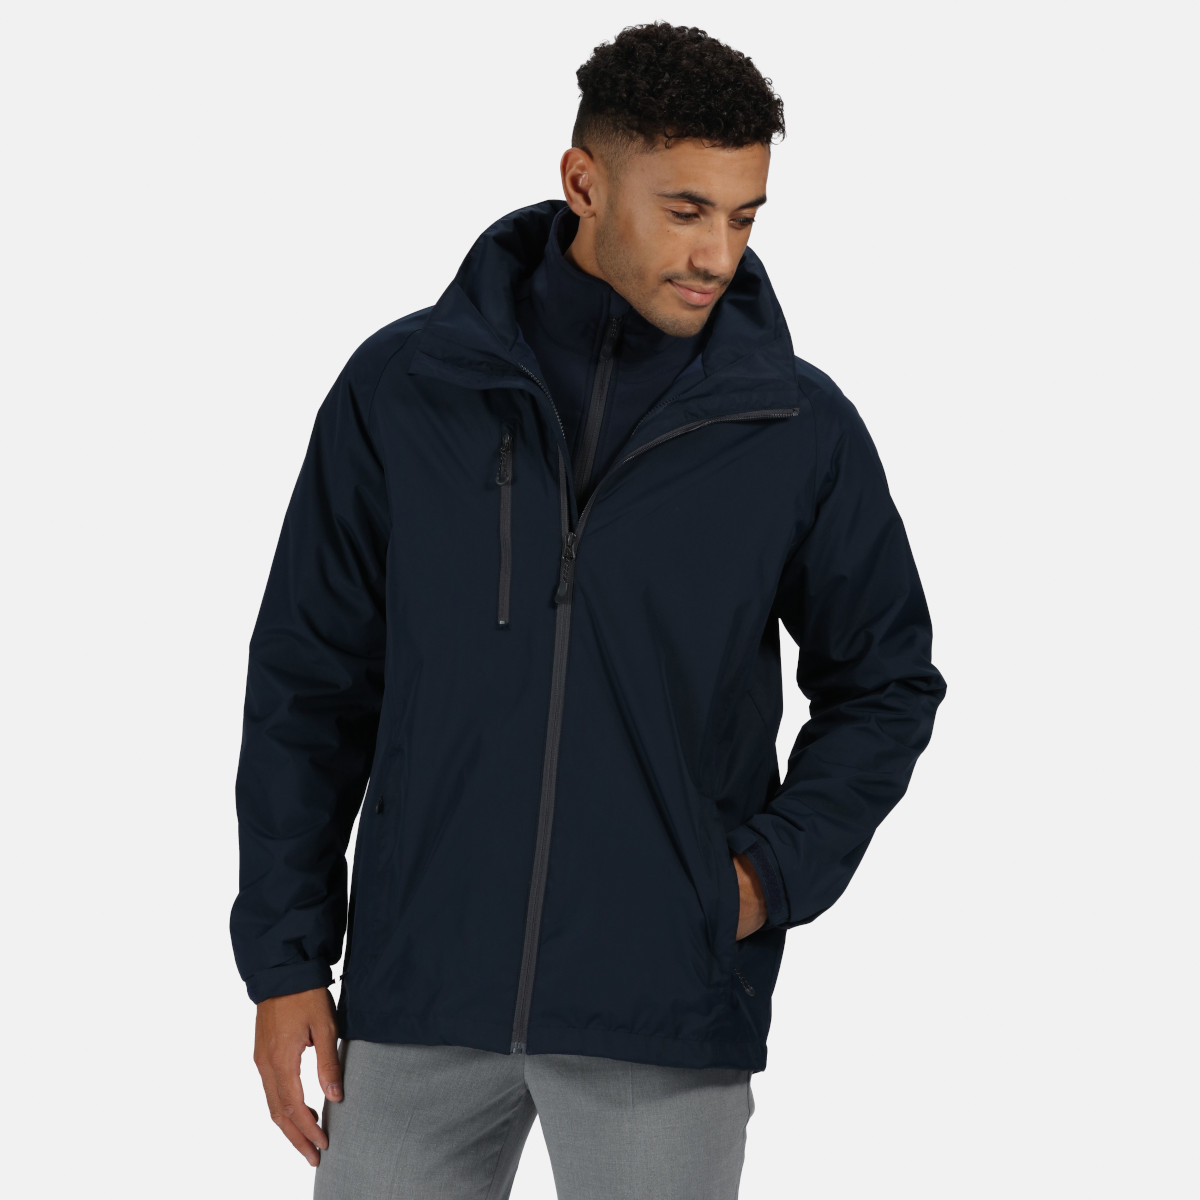 Regatta Honestly Made Recycled 3 in 1 Jacket